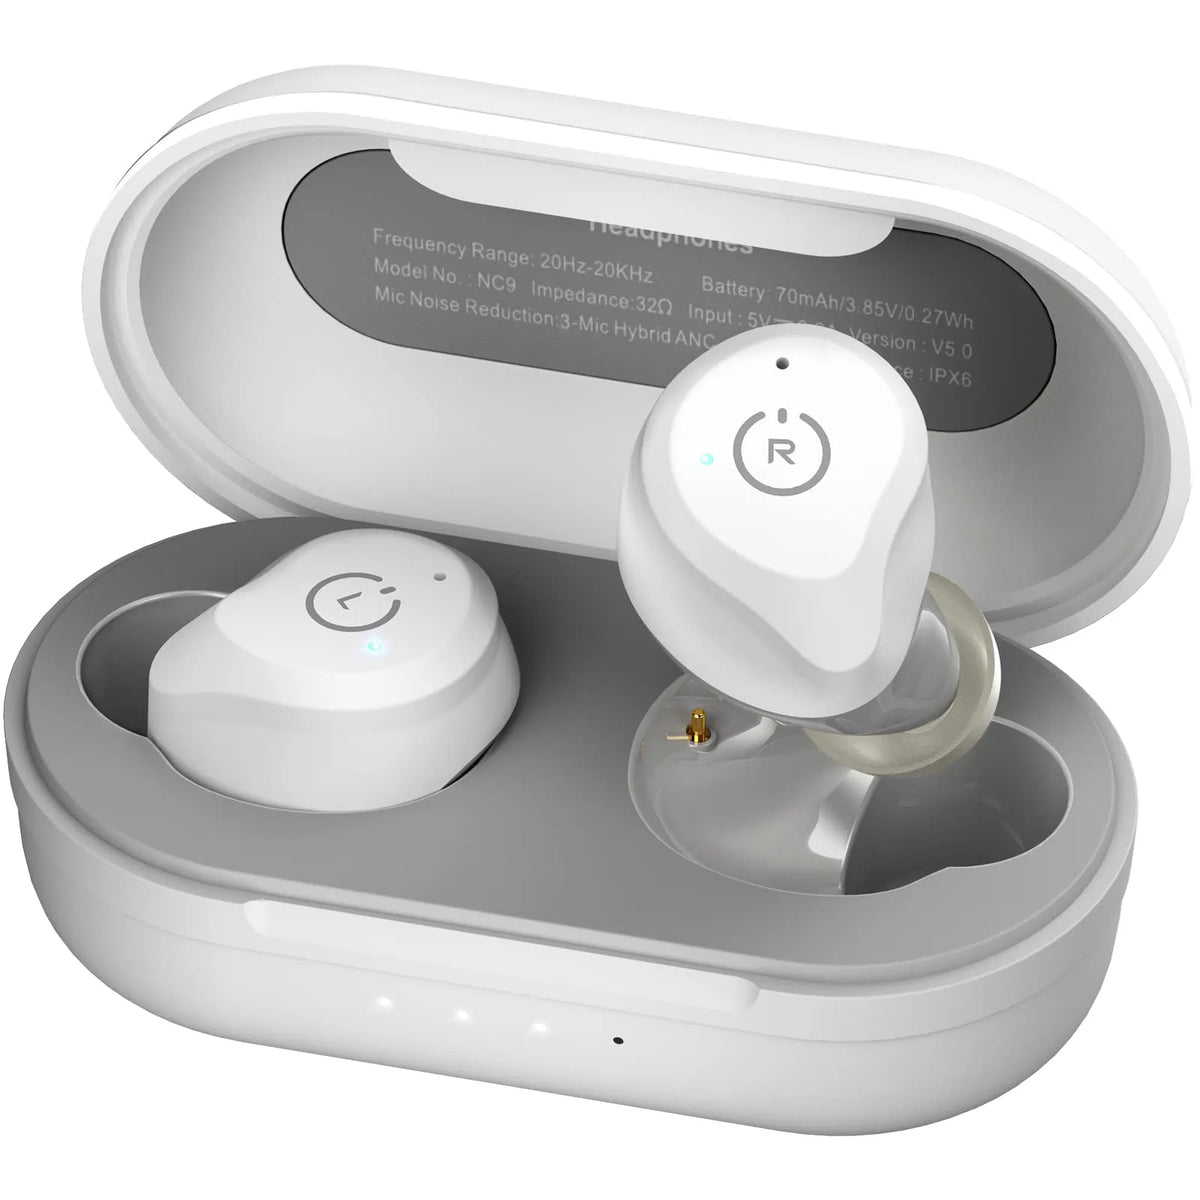 TOZO NC9 Hybrid Active Noise Cancelling Wireless Earbuds-White